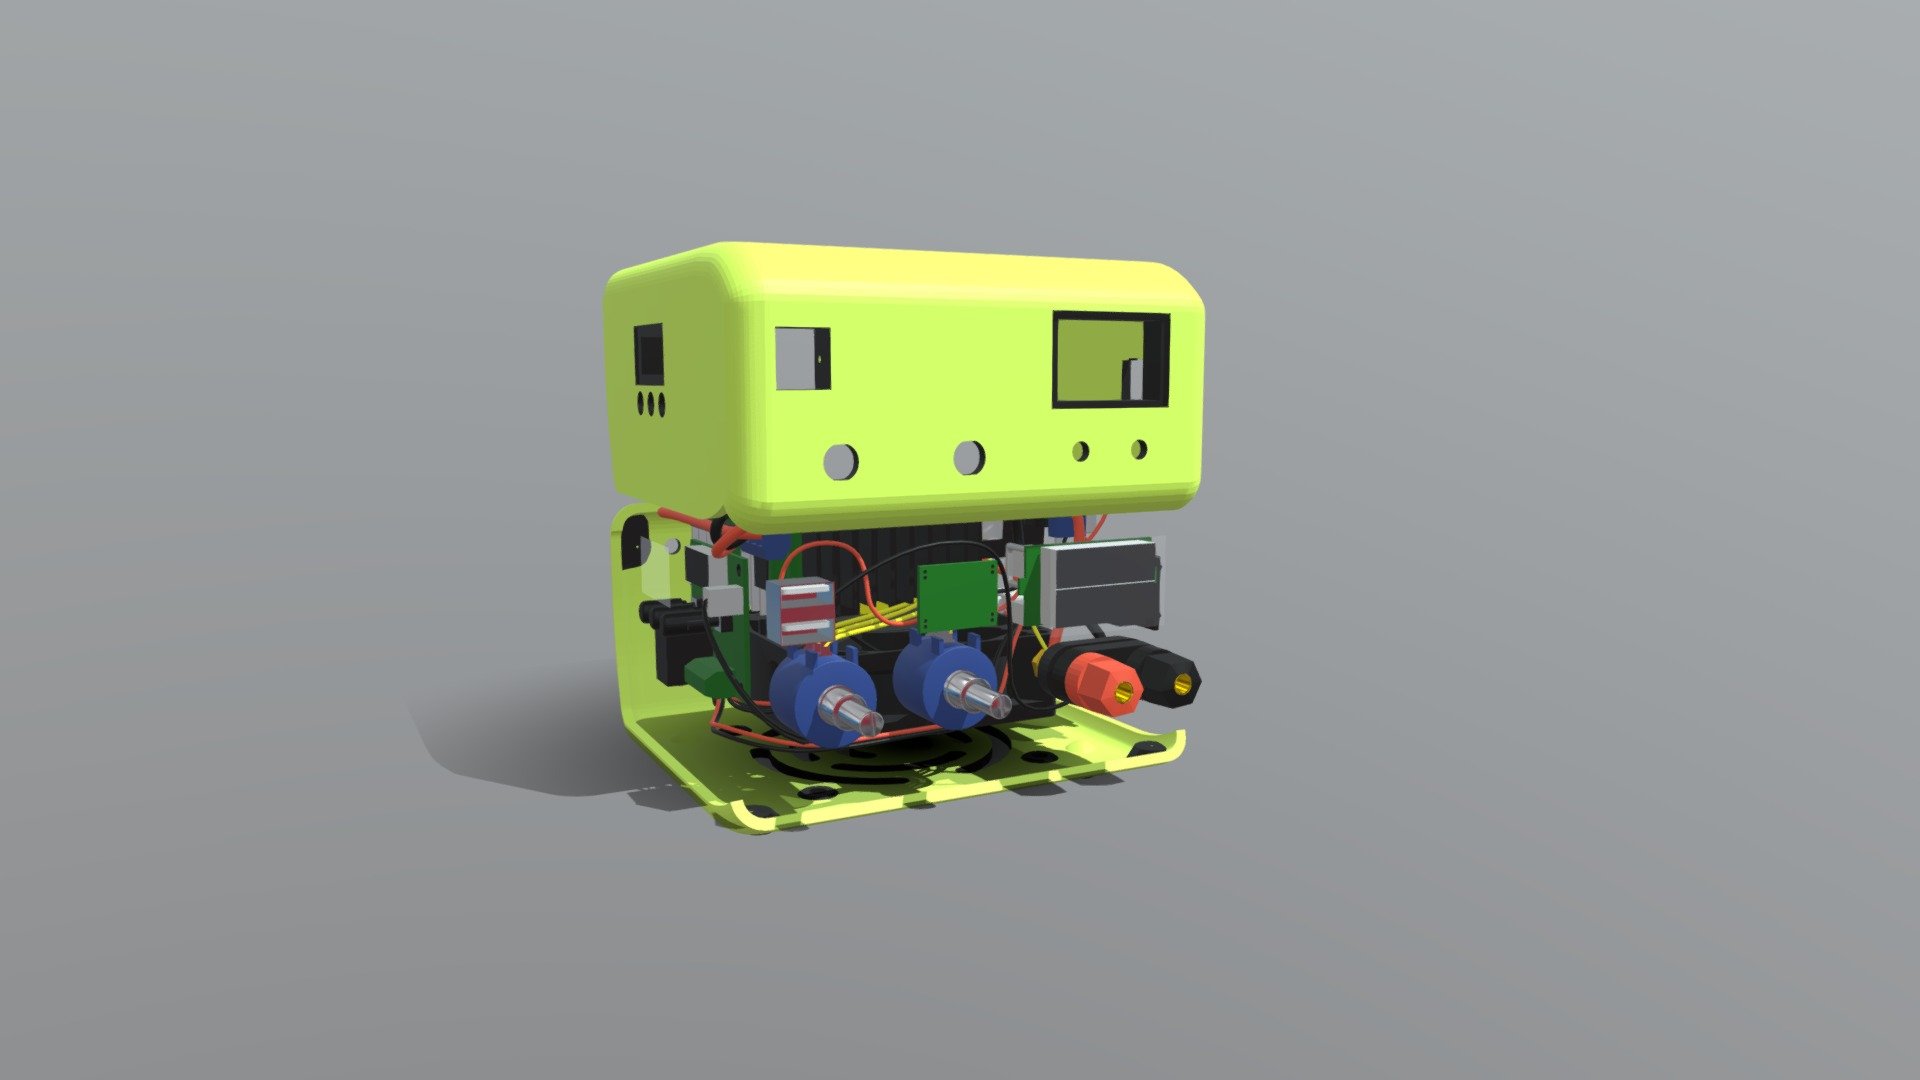 Laboratory power supply i created for printing with with all components and wires modelled - Laboratory Power Supply for 3D printing - Download Free 3D model by shtran 3d model